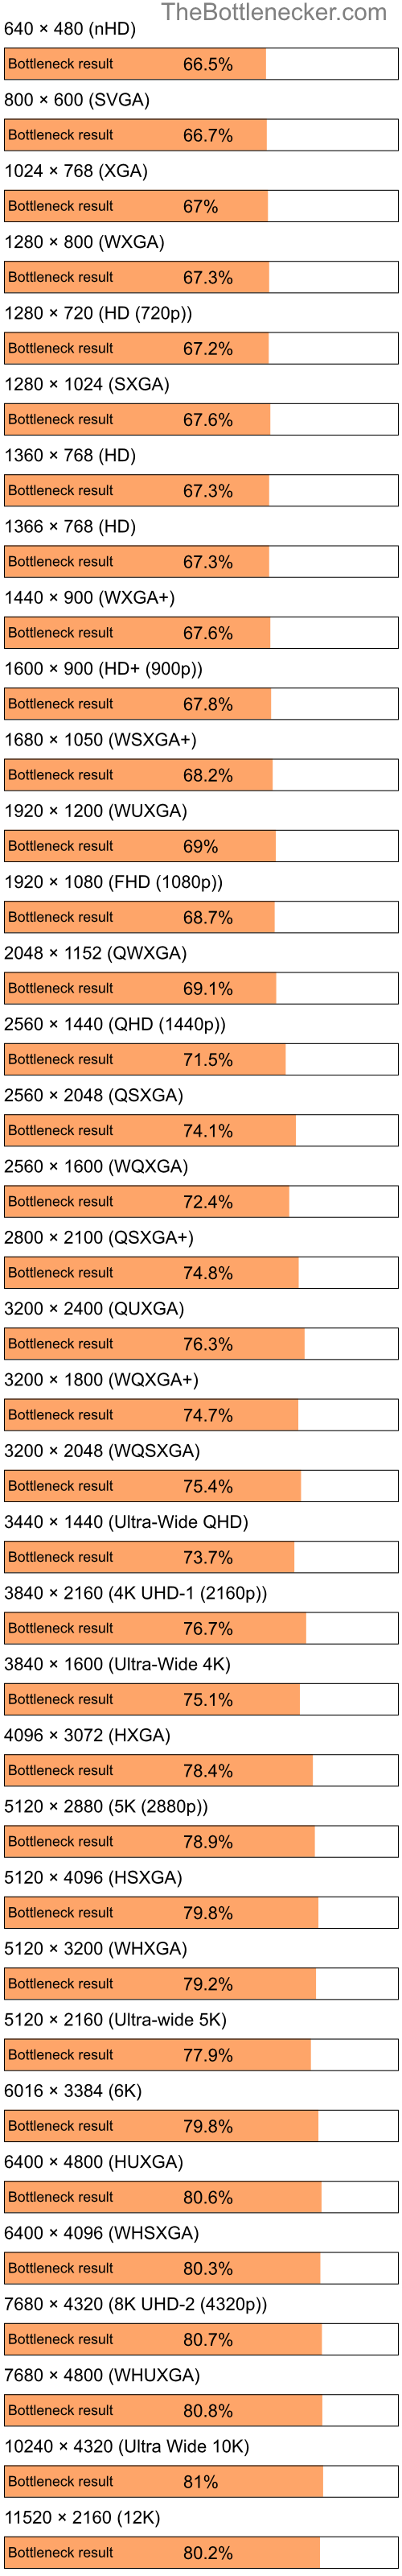 Bottleneck results by resolution for Intel Atom N270 and AMD Mobility Radeon X2300 in Processor Intense Tasks